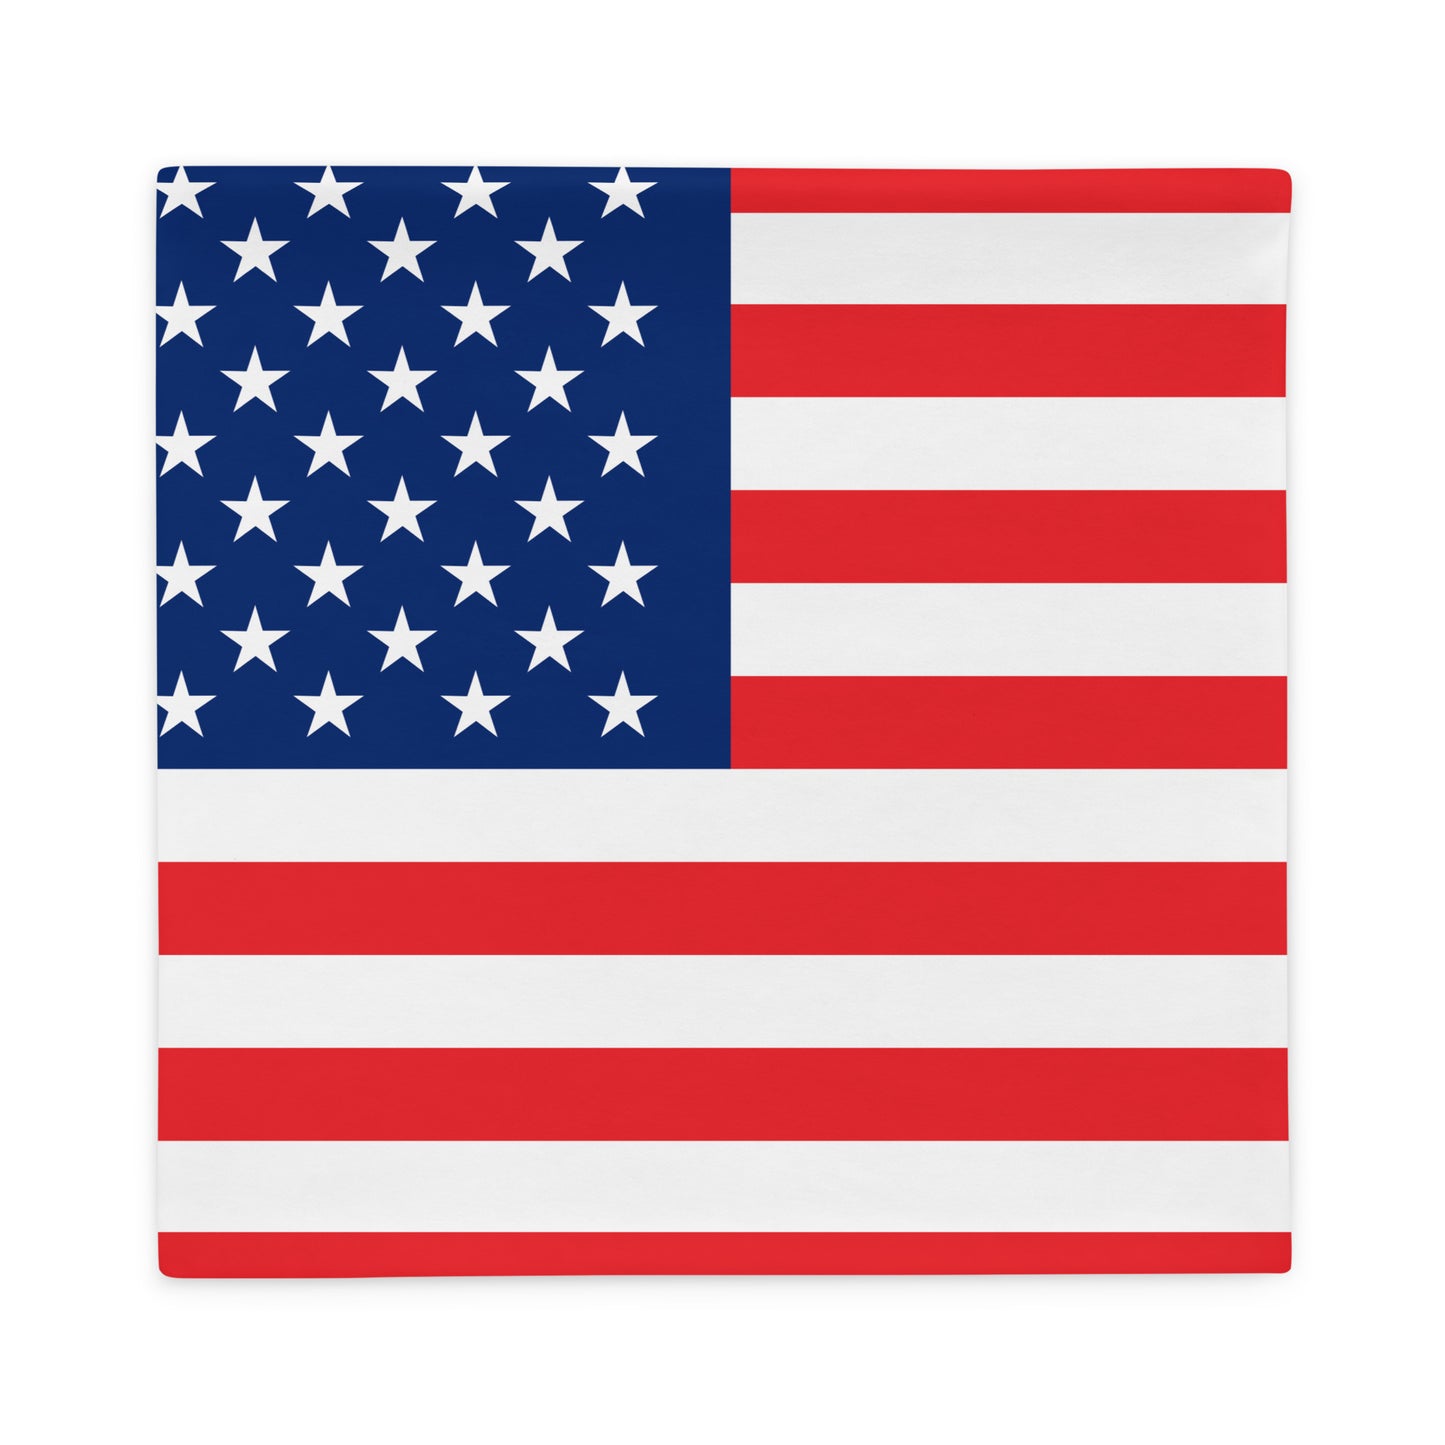 U.S.A Flag - Sustainably Made Pillows